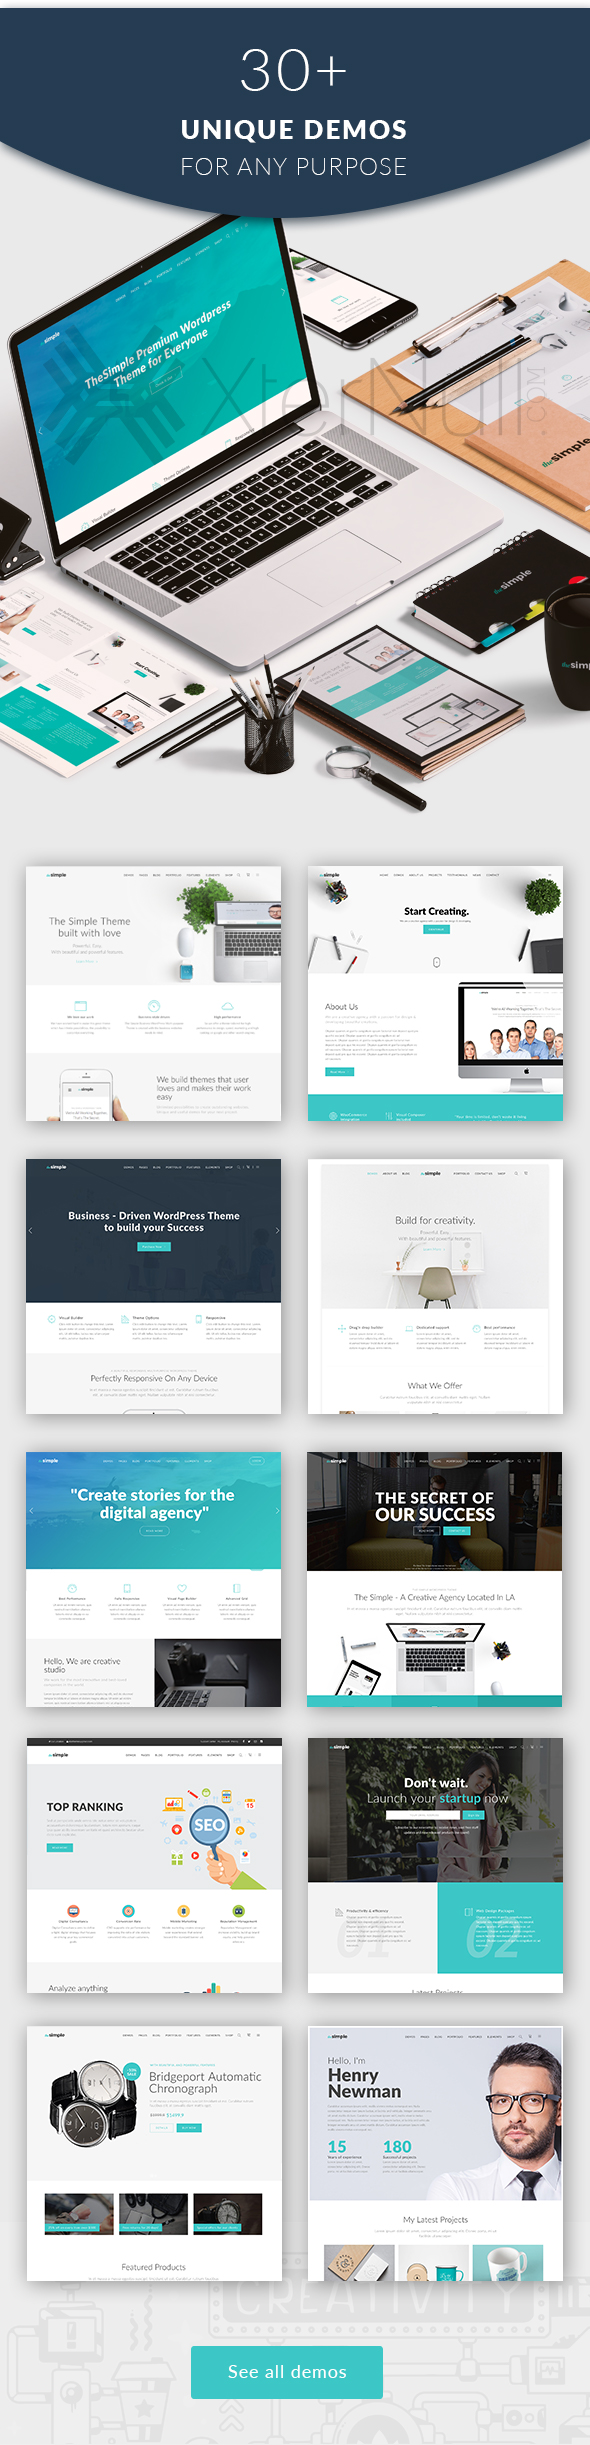 The Simple v2.7.2 WordPress Theme [Nulled]